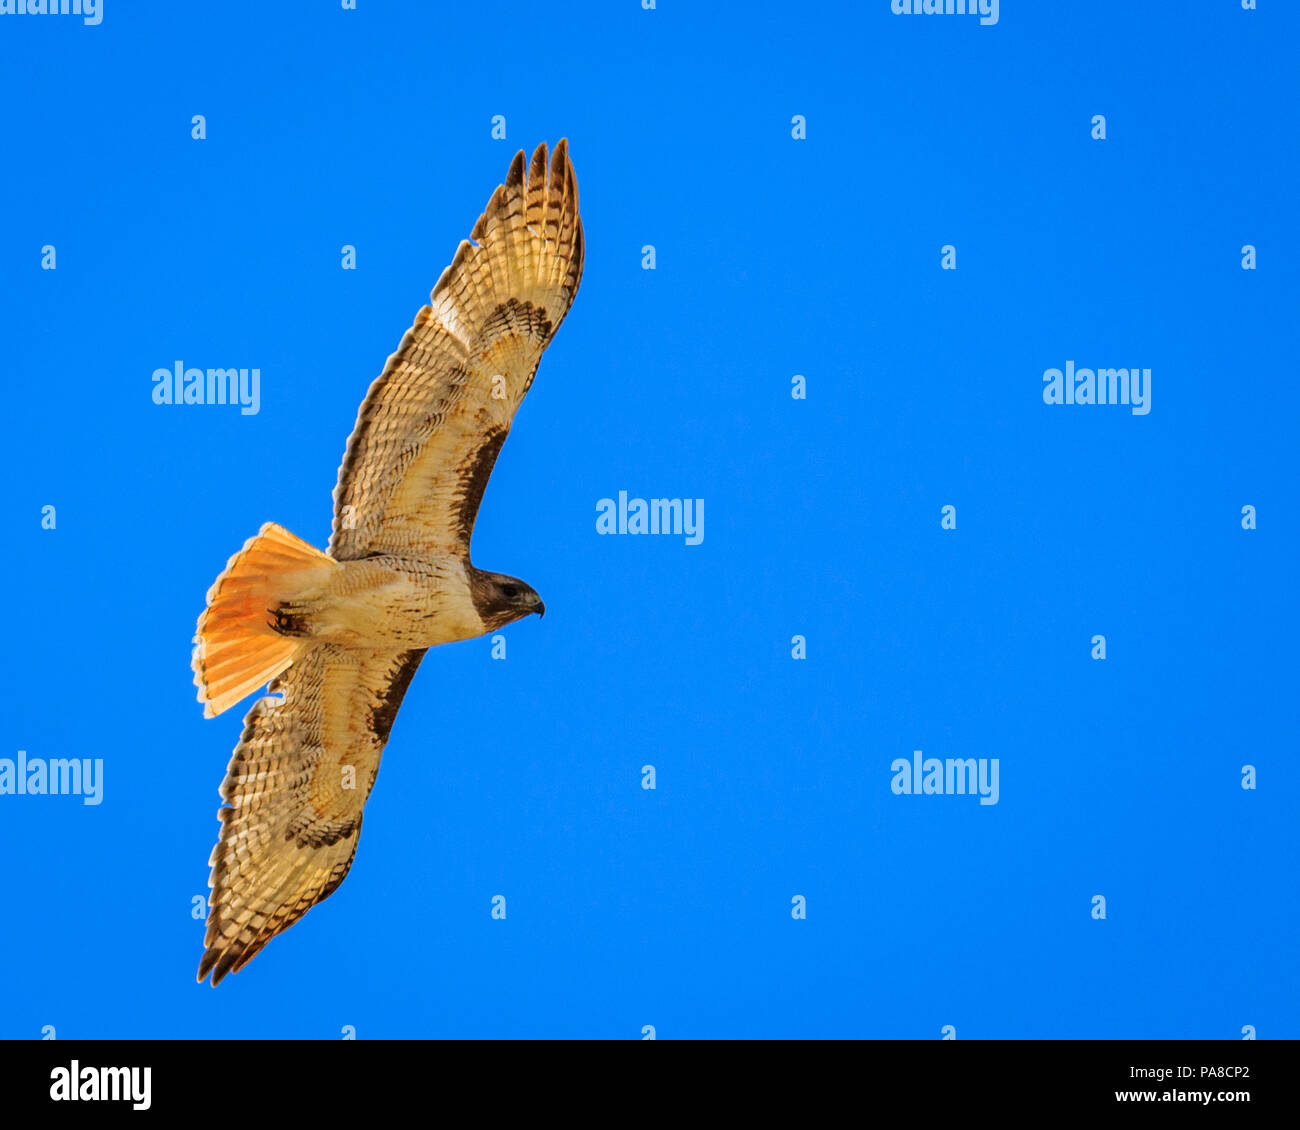 Red tailed hawk soaring lliesurely against a blue sky keeping its eye on you Stock Photo